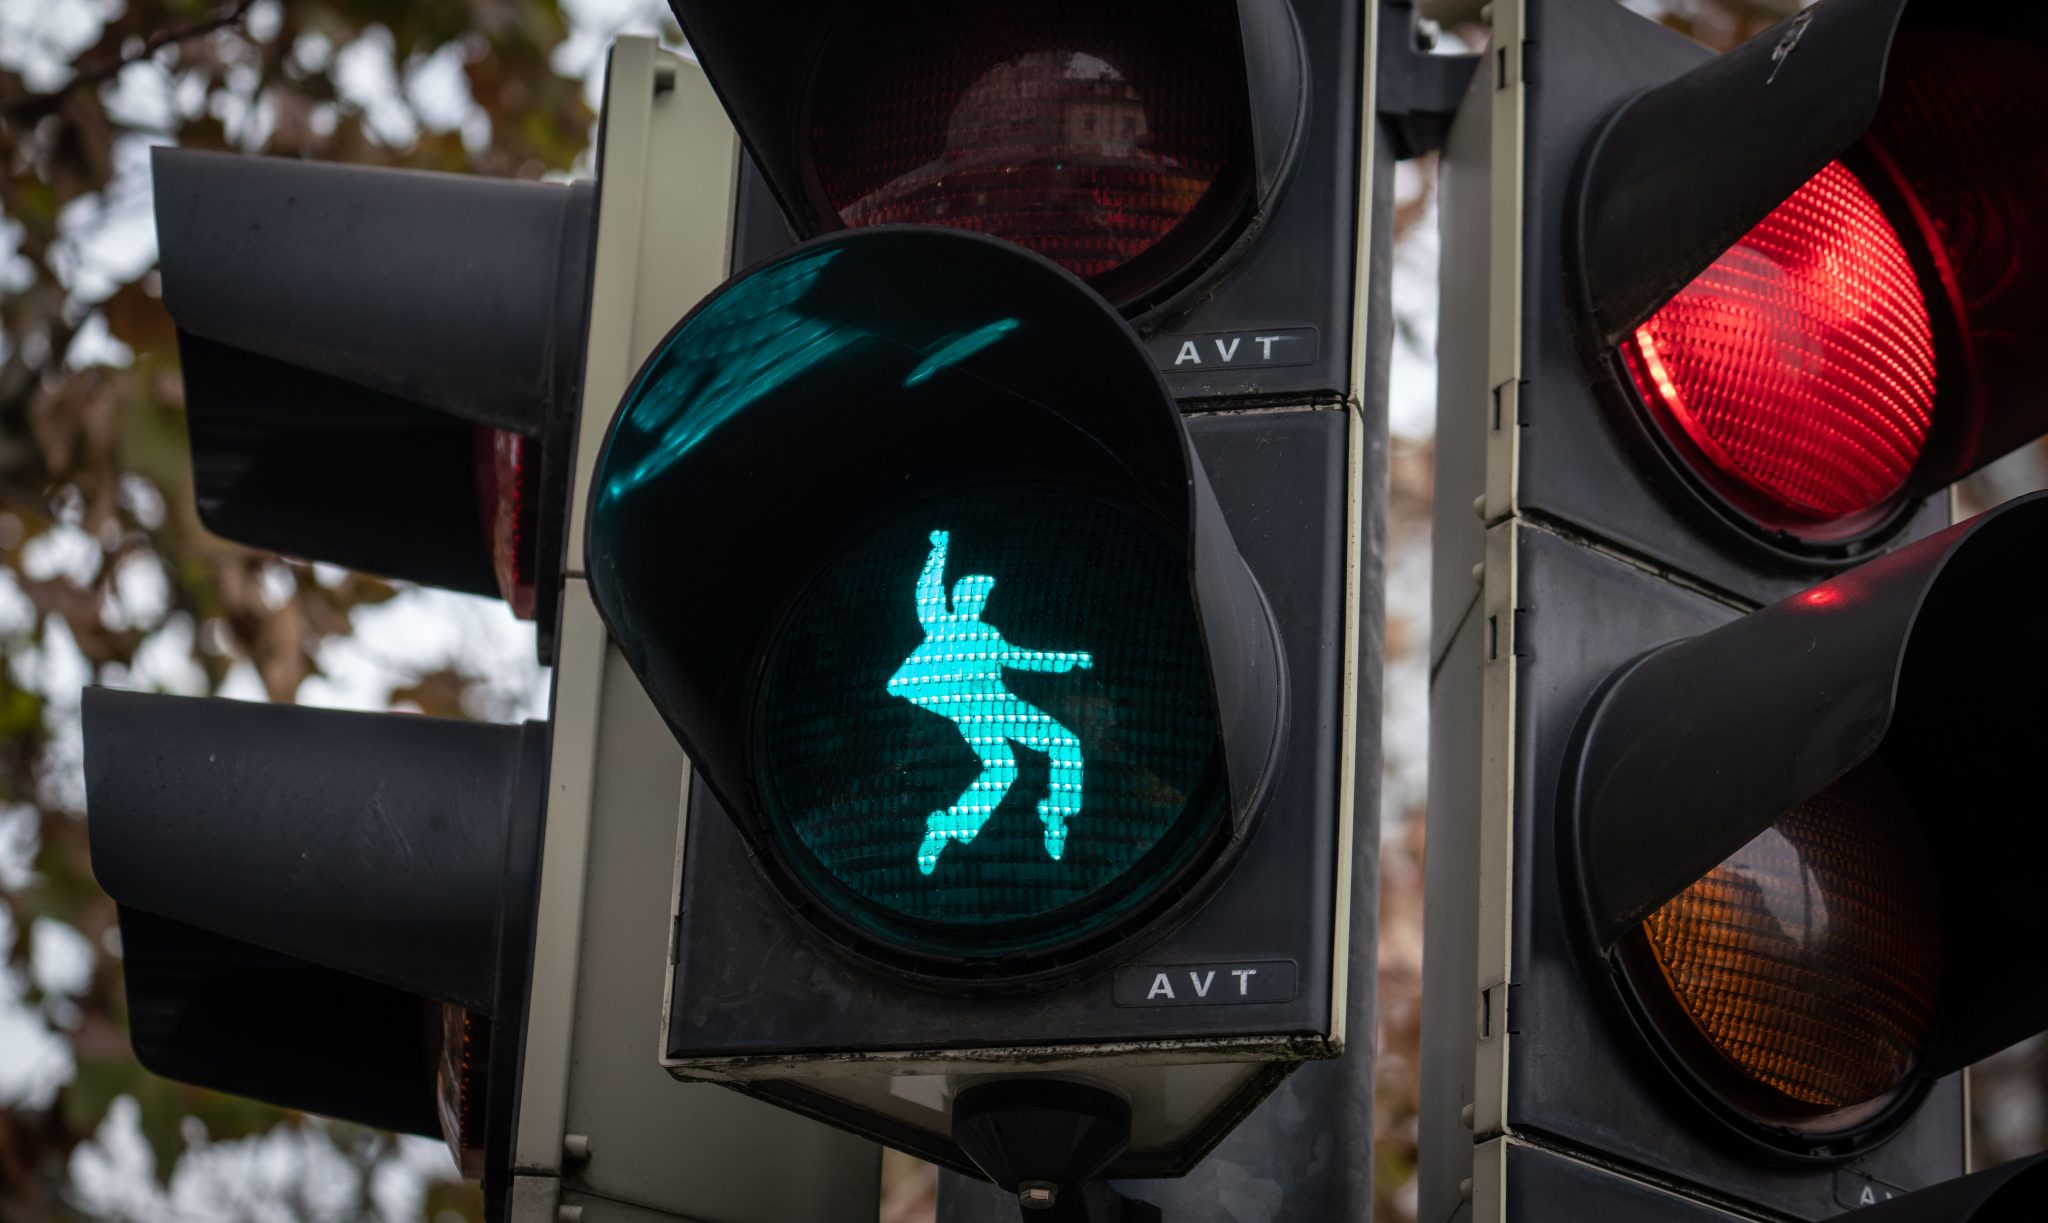 December 2018, Hessen, Friedberg: A little traffic light man in the shape of a dancing Elvis Presely lights up at a pedestrian traffic light at Elvis Presley Square. The 